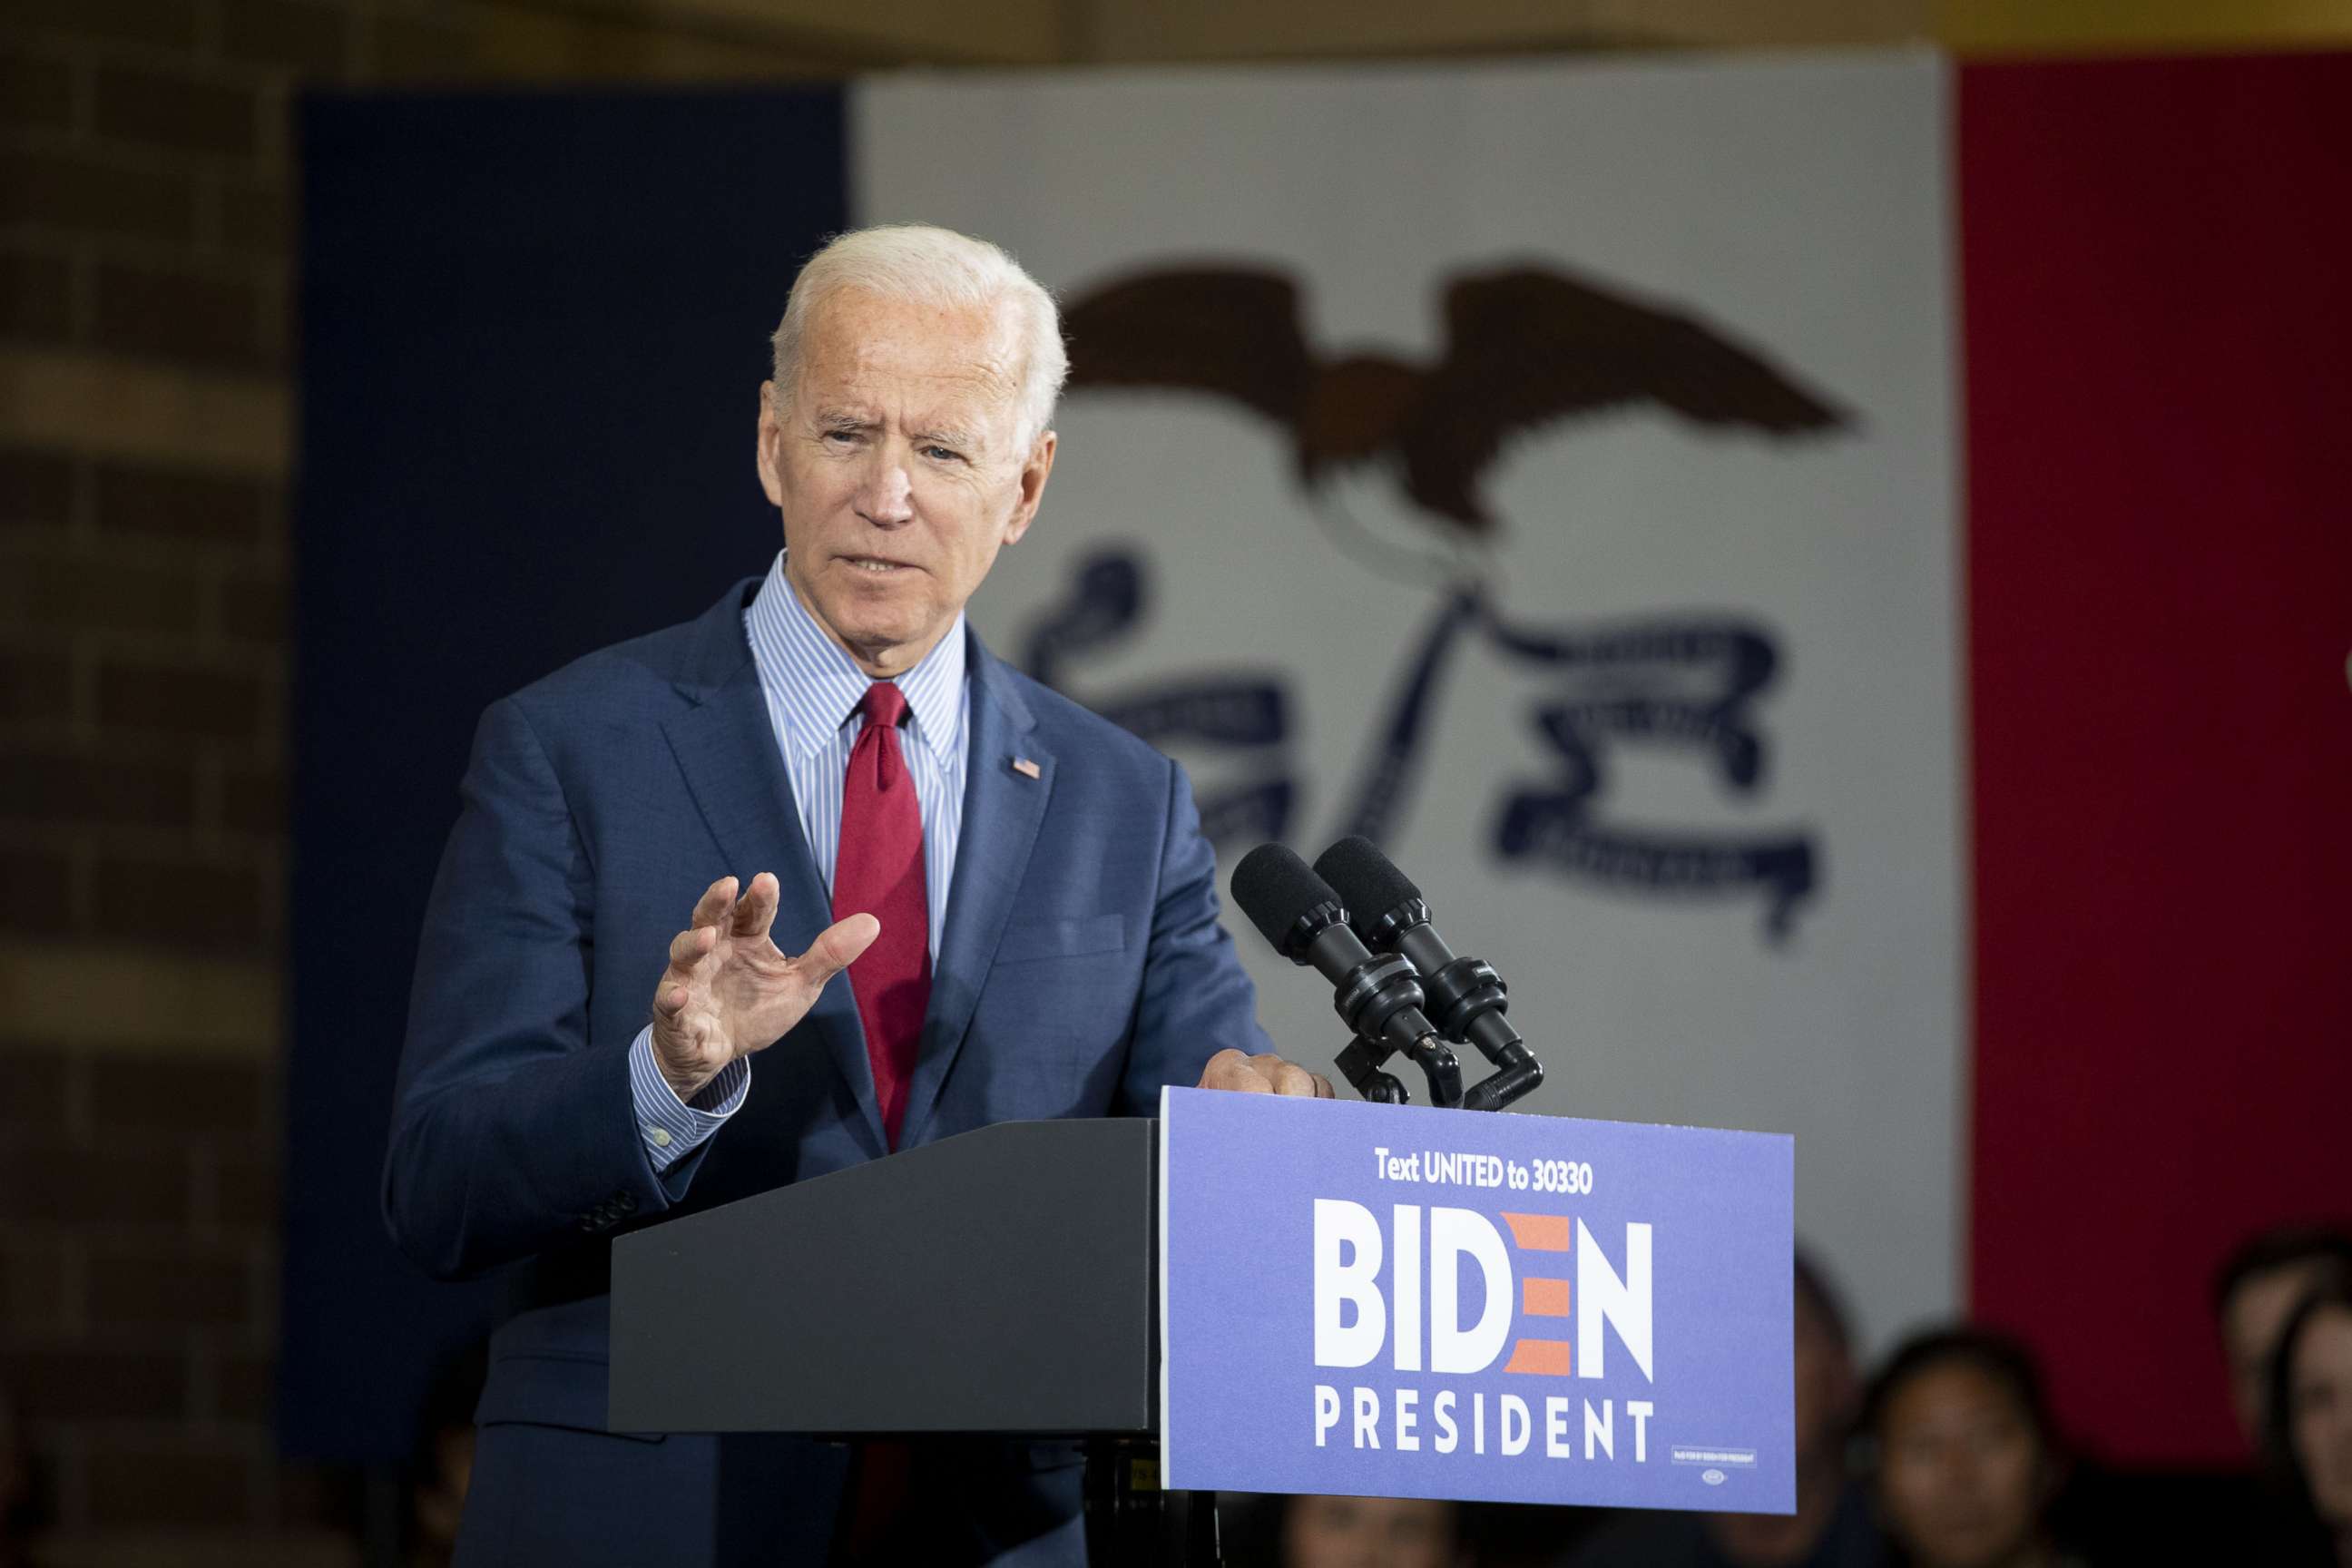 PHOTO: Former U.S. Vice President Joe Biden, 2020 Democratic presidential candidate, speaks during a campaign event in Davenport, Iowa, U.S., on Wednesday, Oct. 16, 2019.